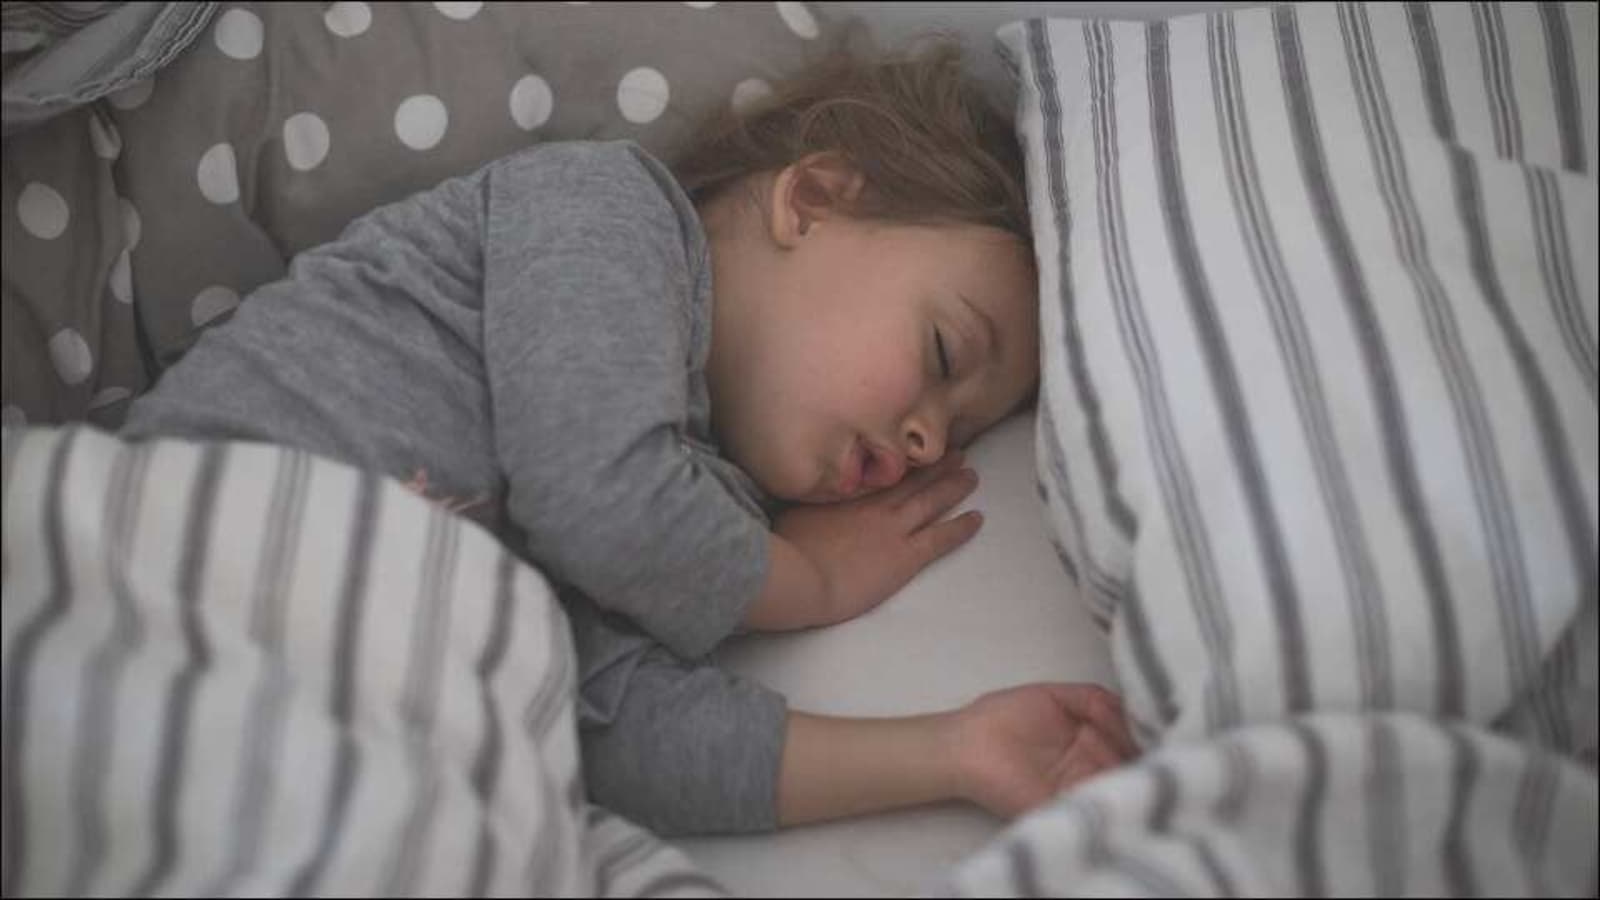 World Sleep Day 2021: 5 tips to ensure a deep and uninterrupted slumber at night